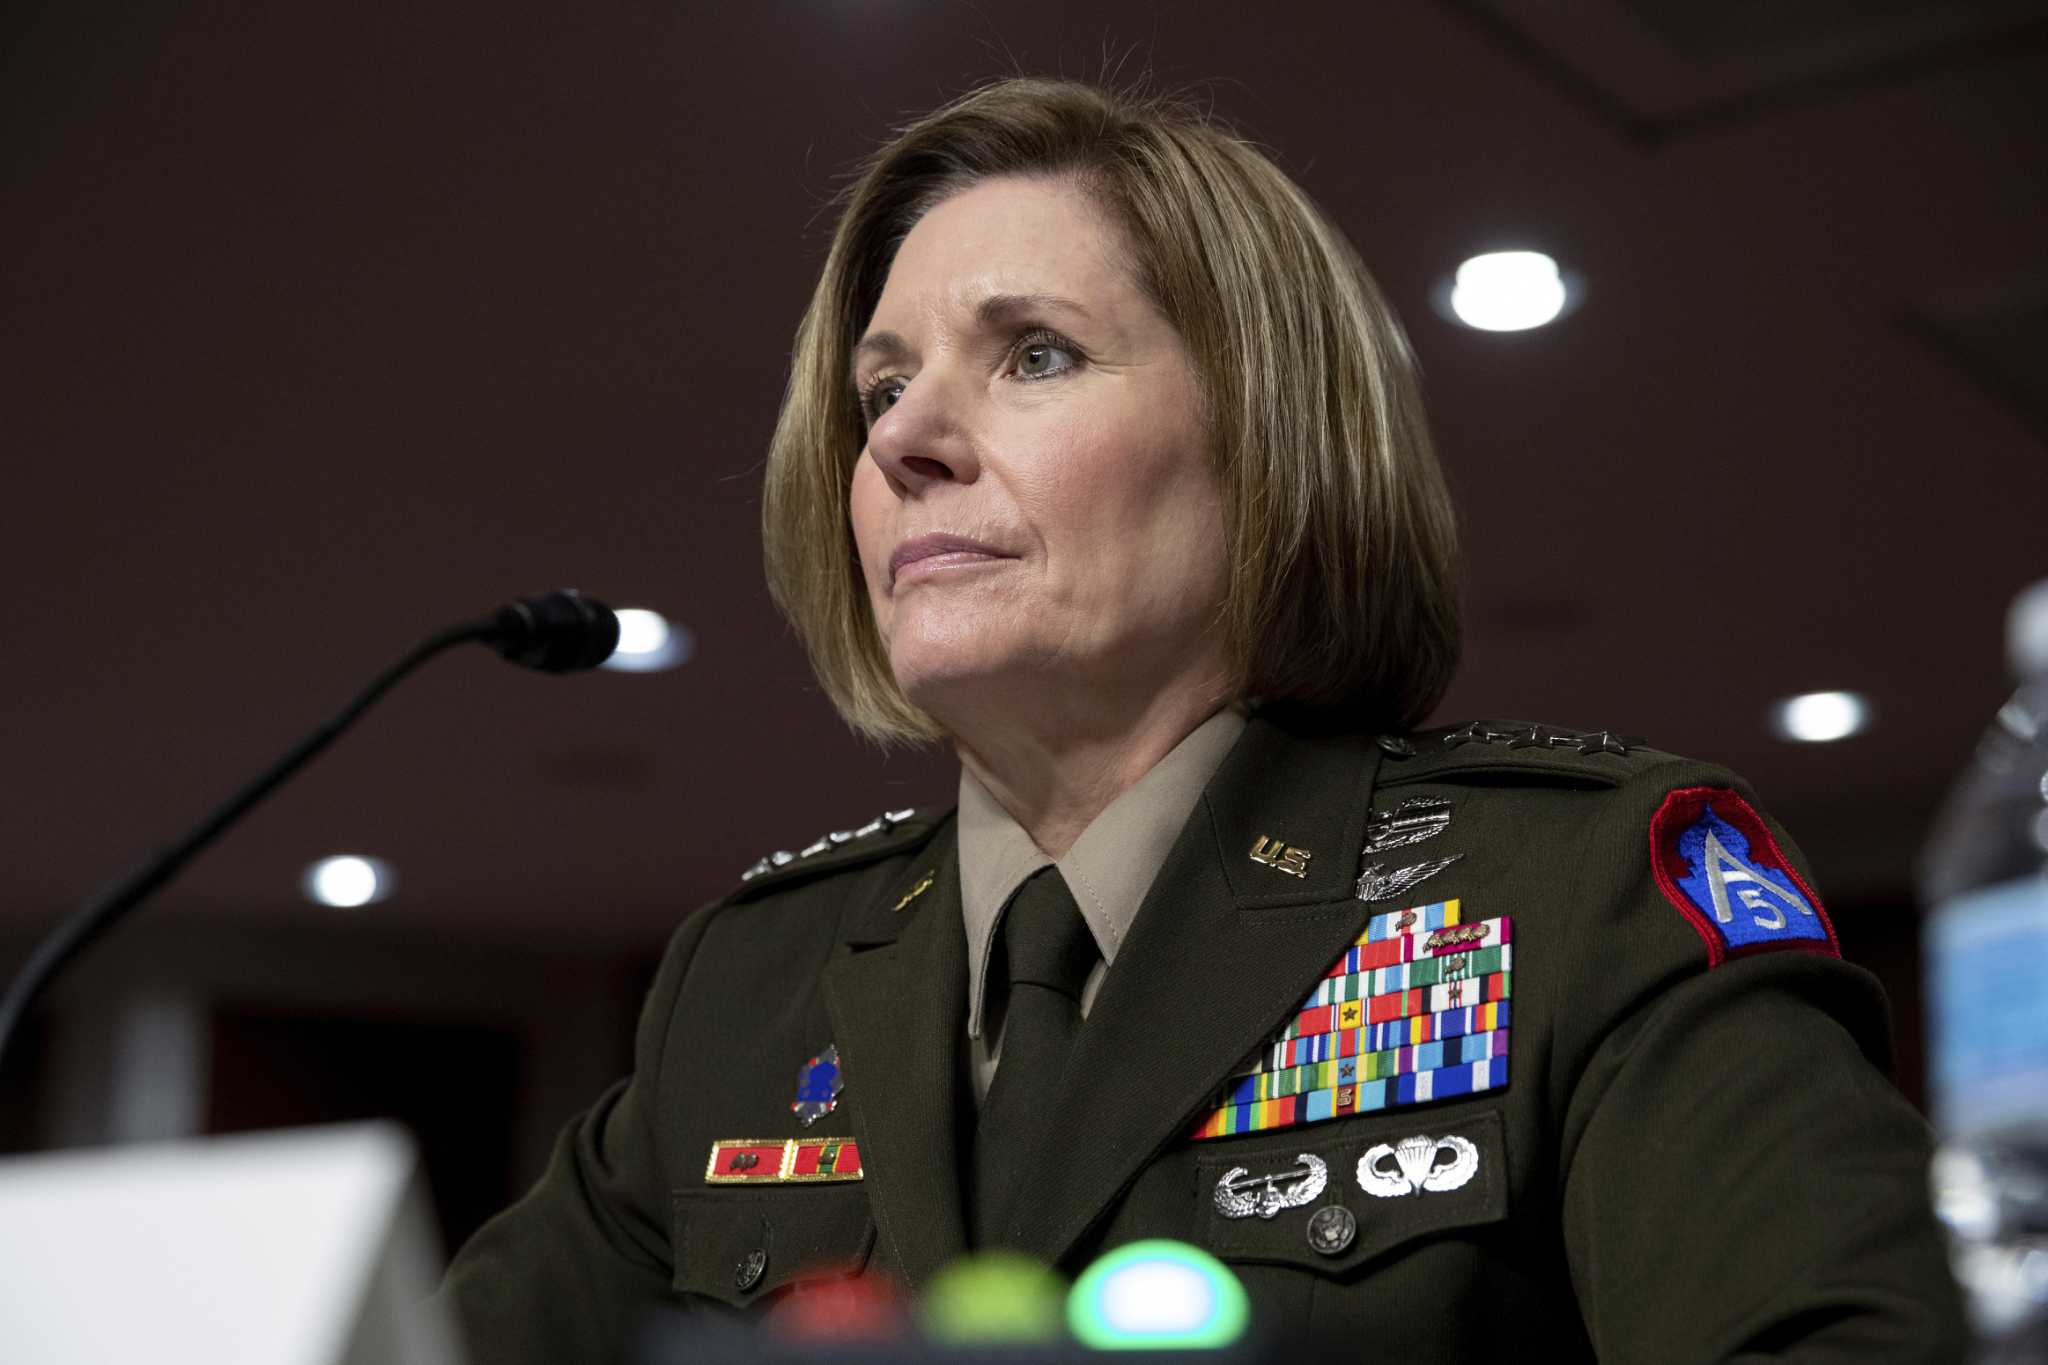 Lt. Gen Richardson, who leads San Antonio-based Army North, will get her fourth star